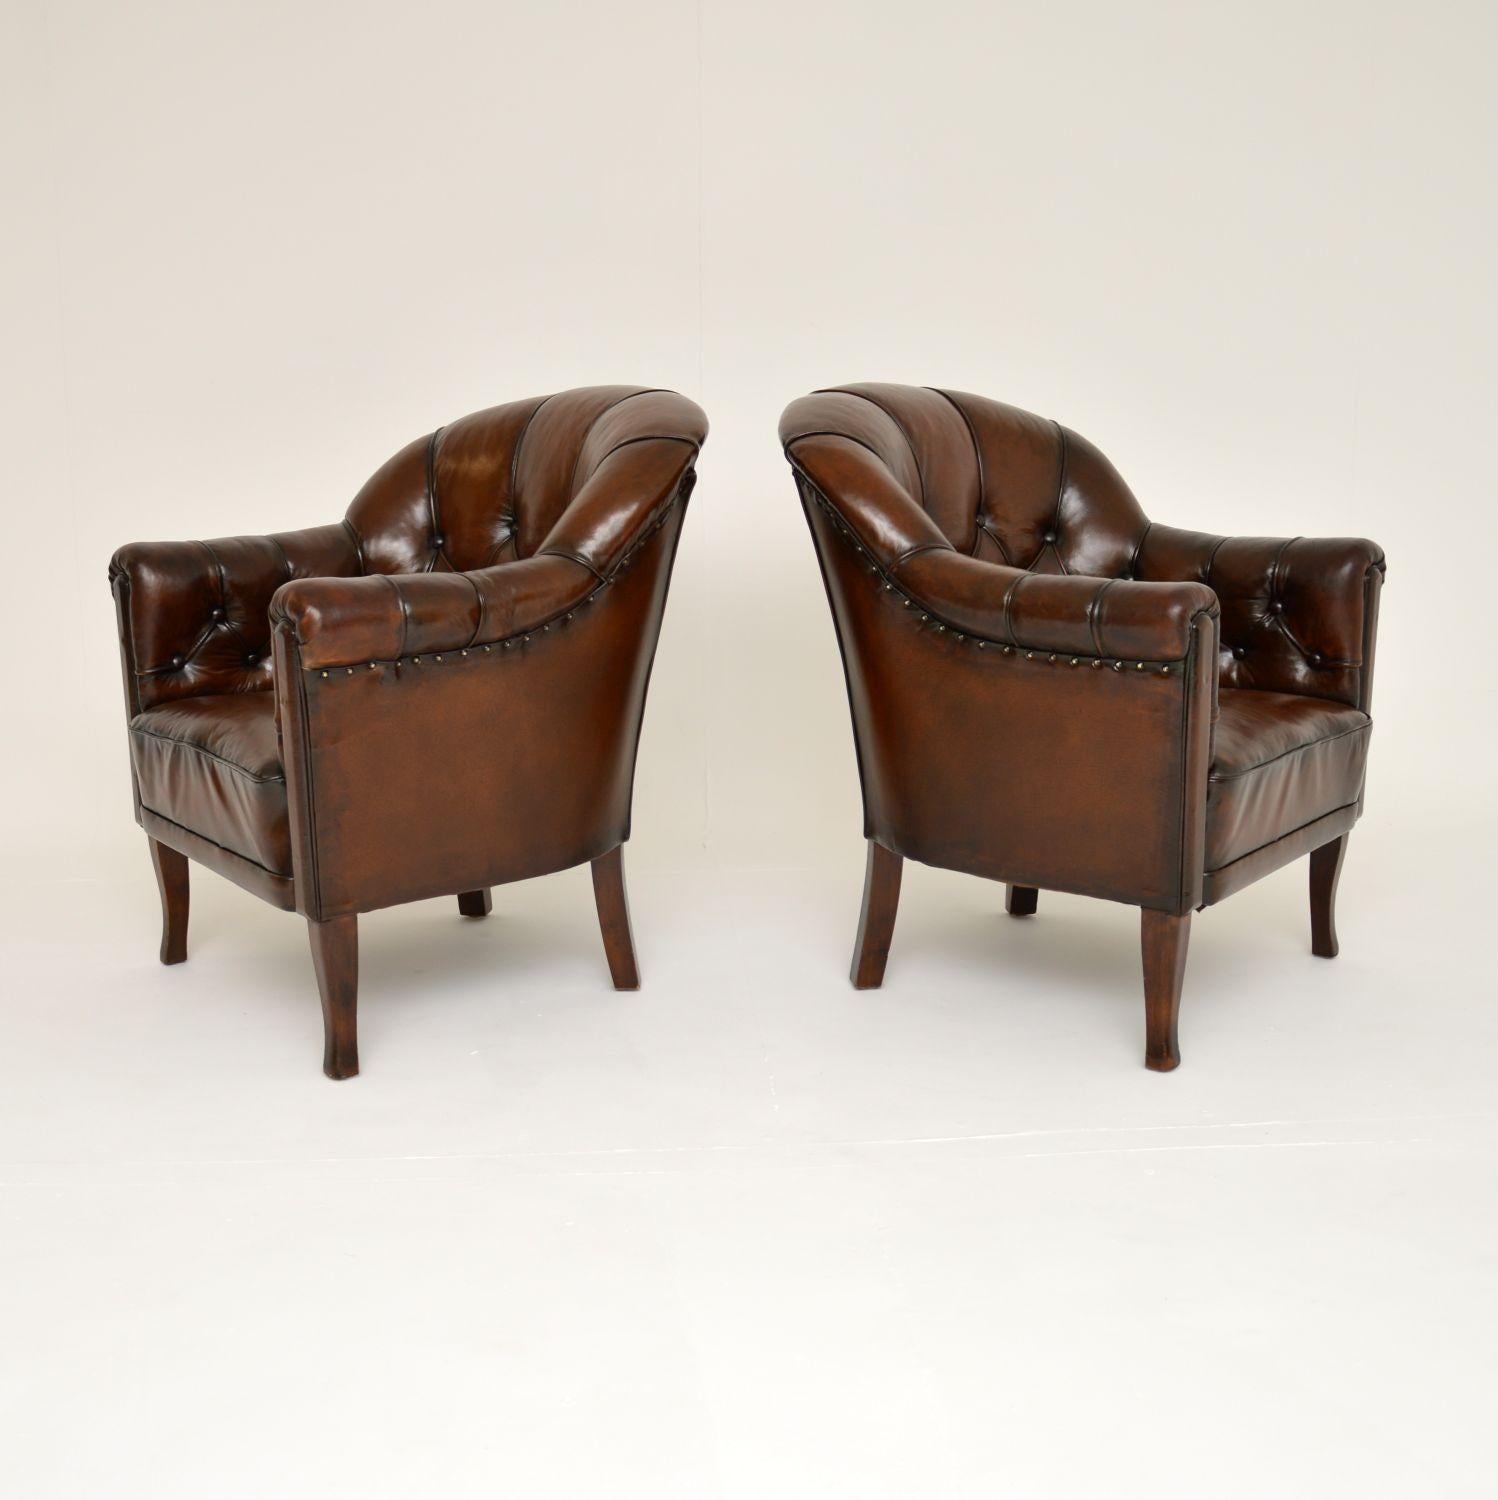 20th Century Pair of Antique Swedish Leather Armchairs